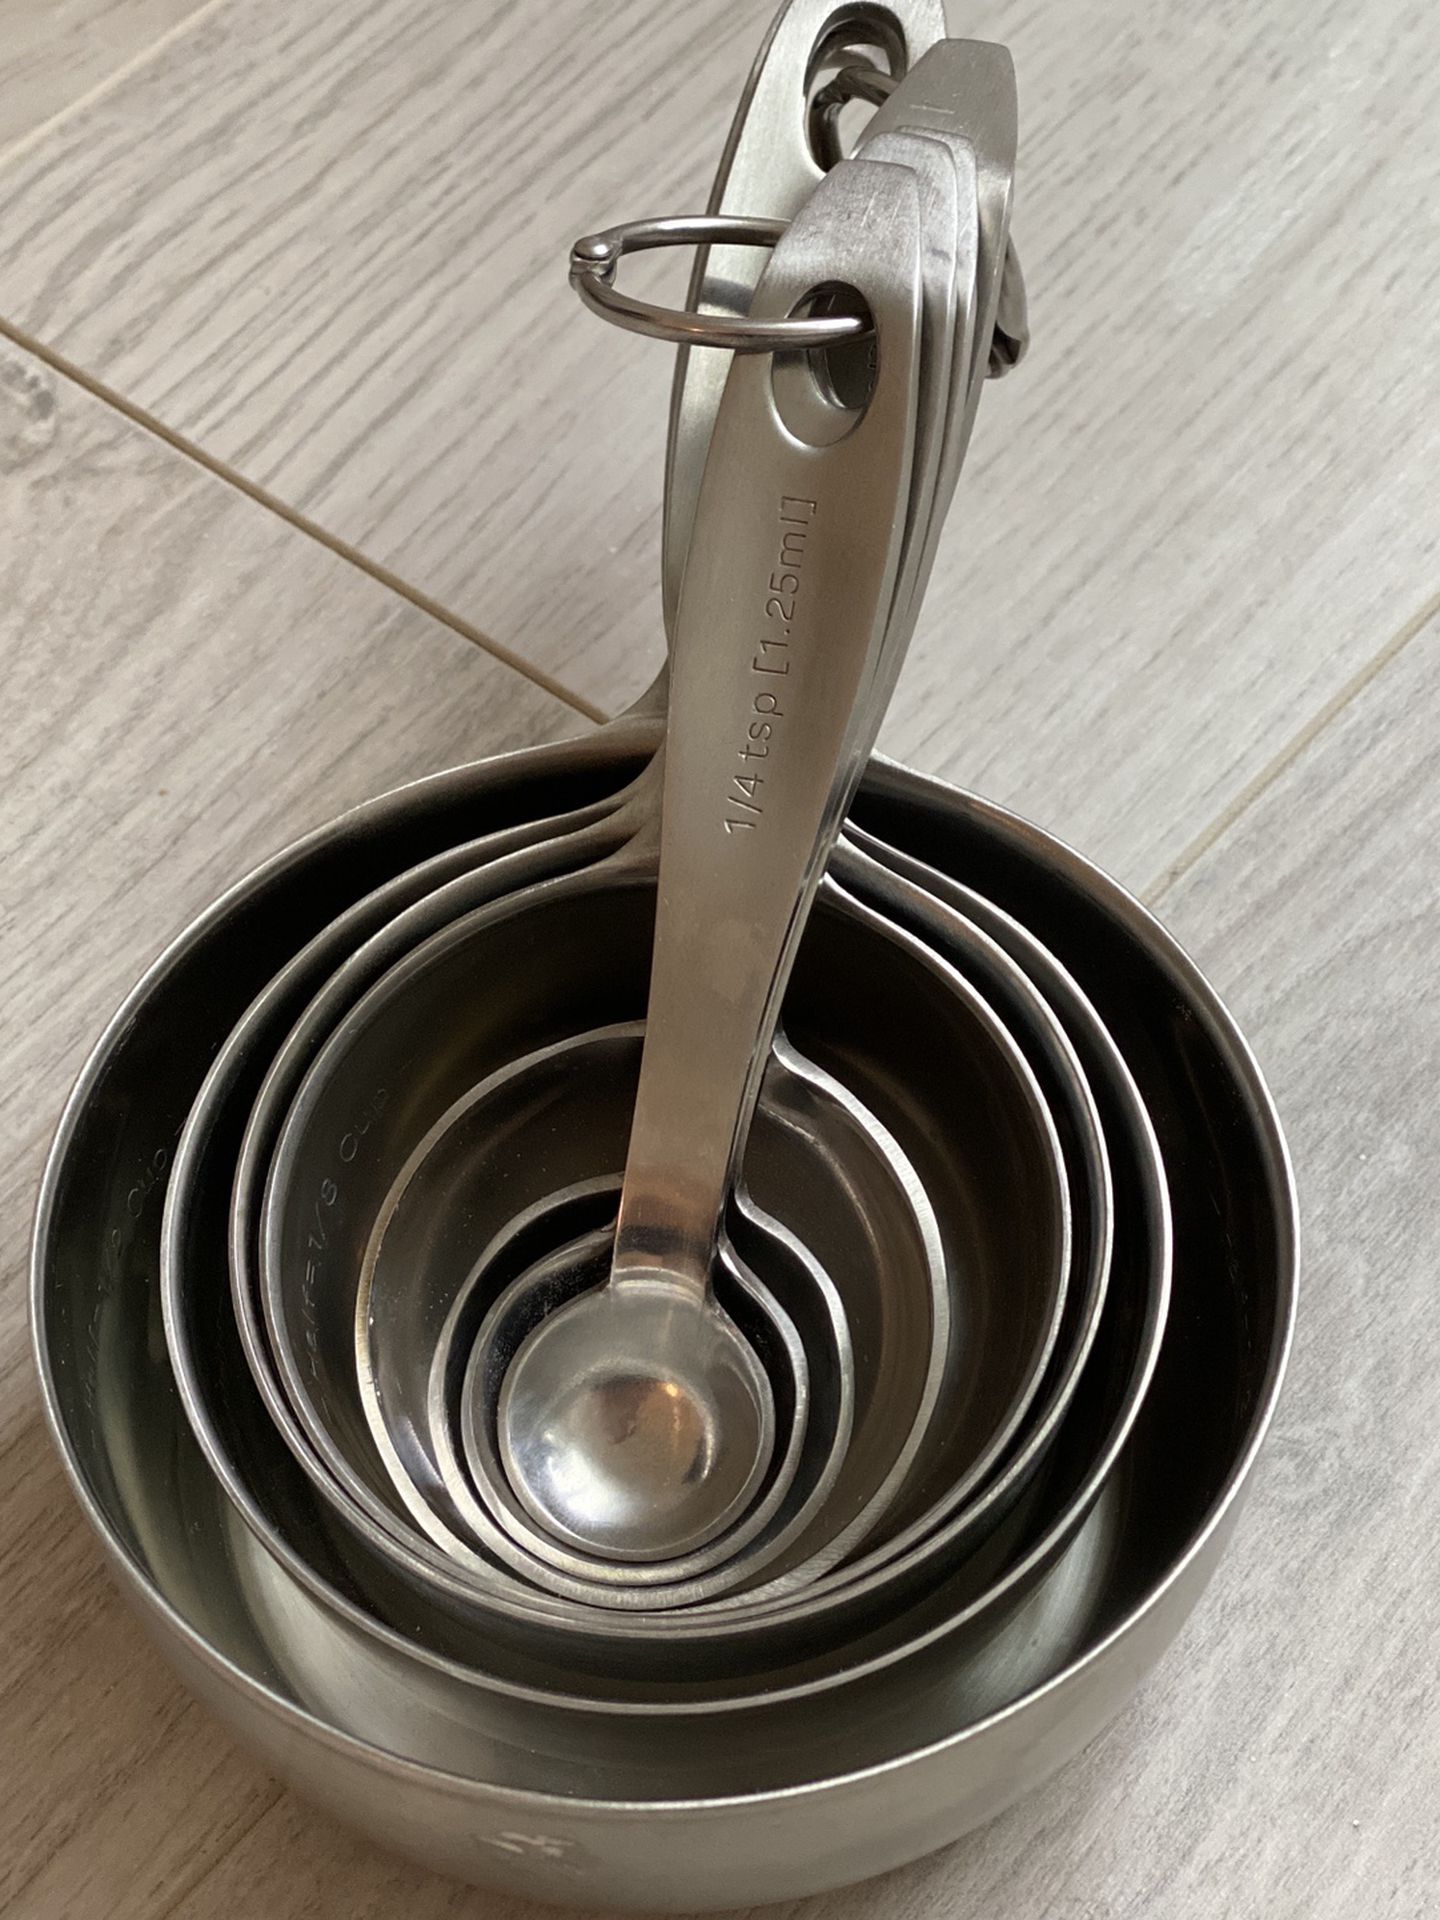 Stainless Steel Measuring Cups - Crate And Barrel